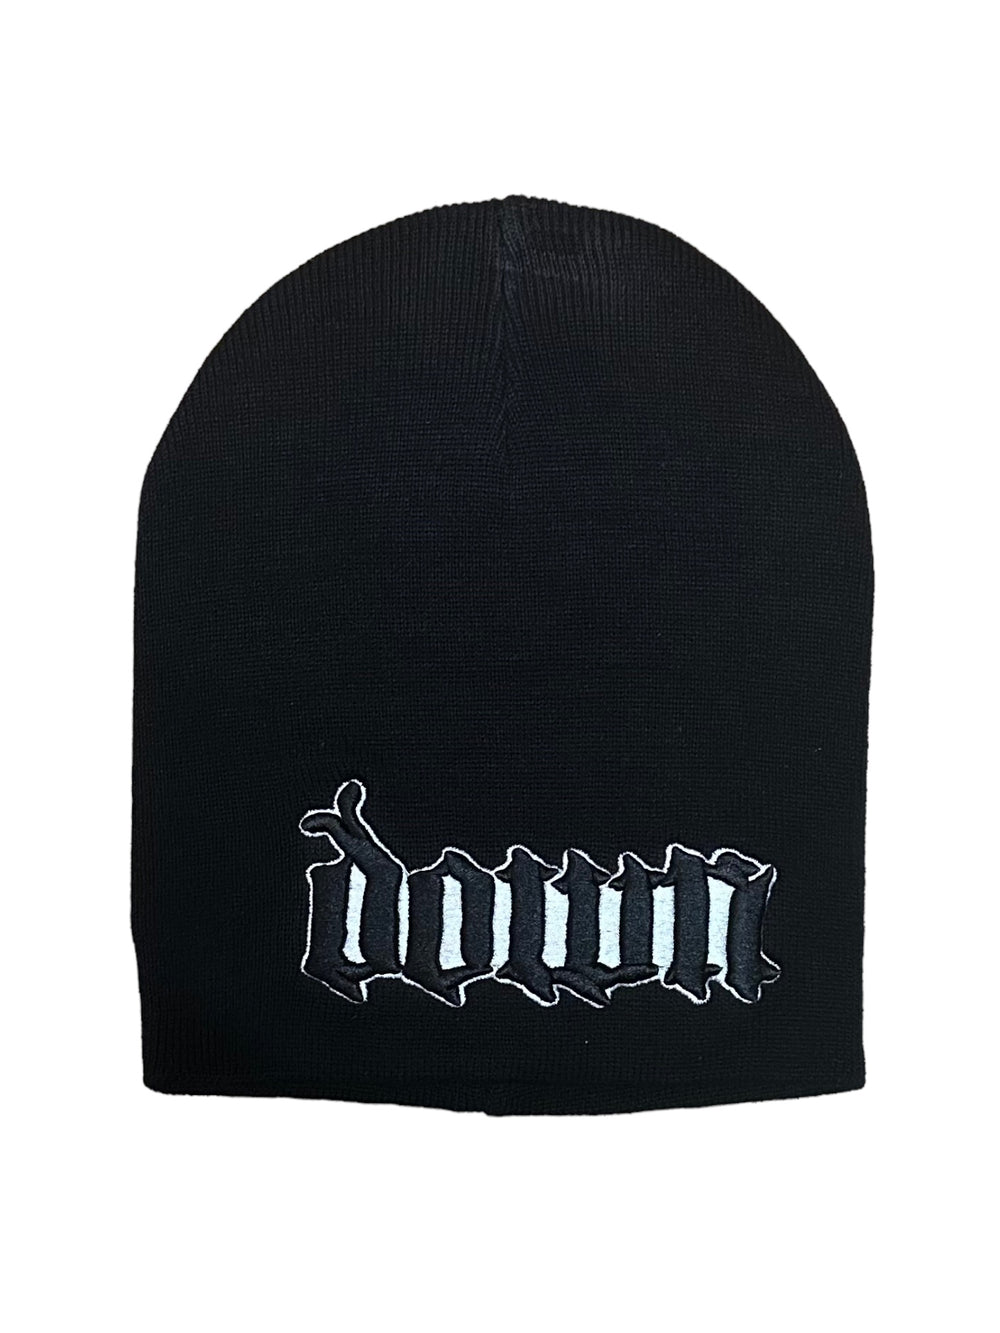 Down - Logo Official Beanie Hat One Size Fits All NEW